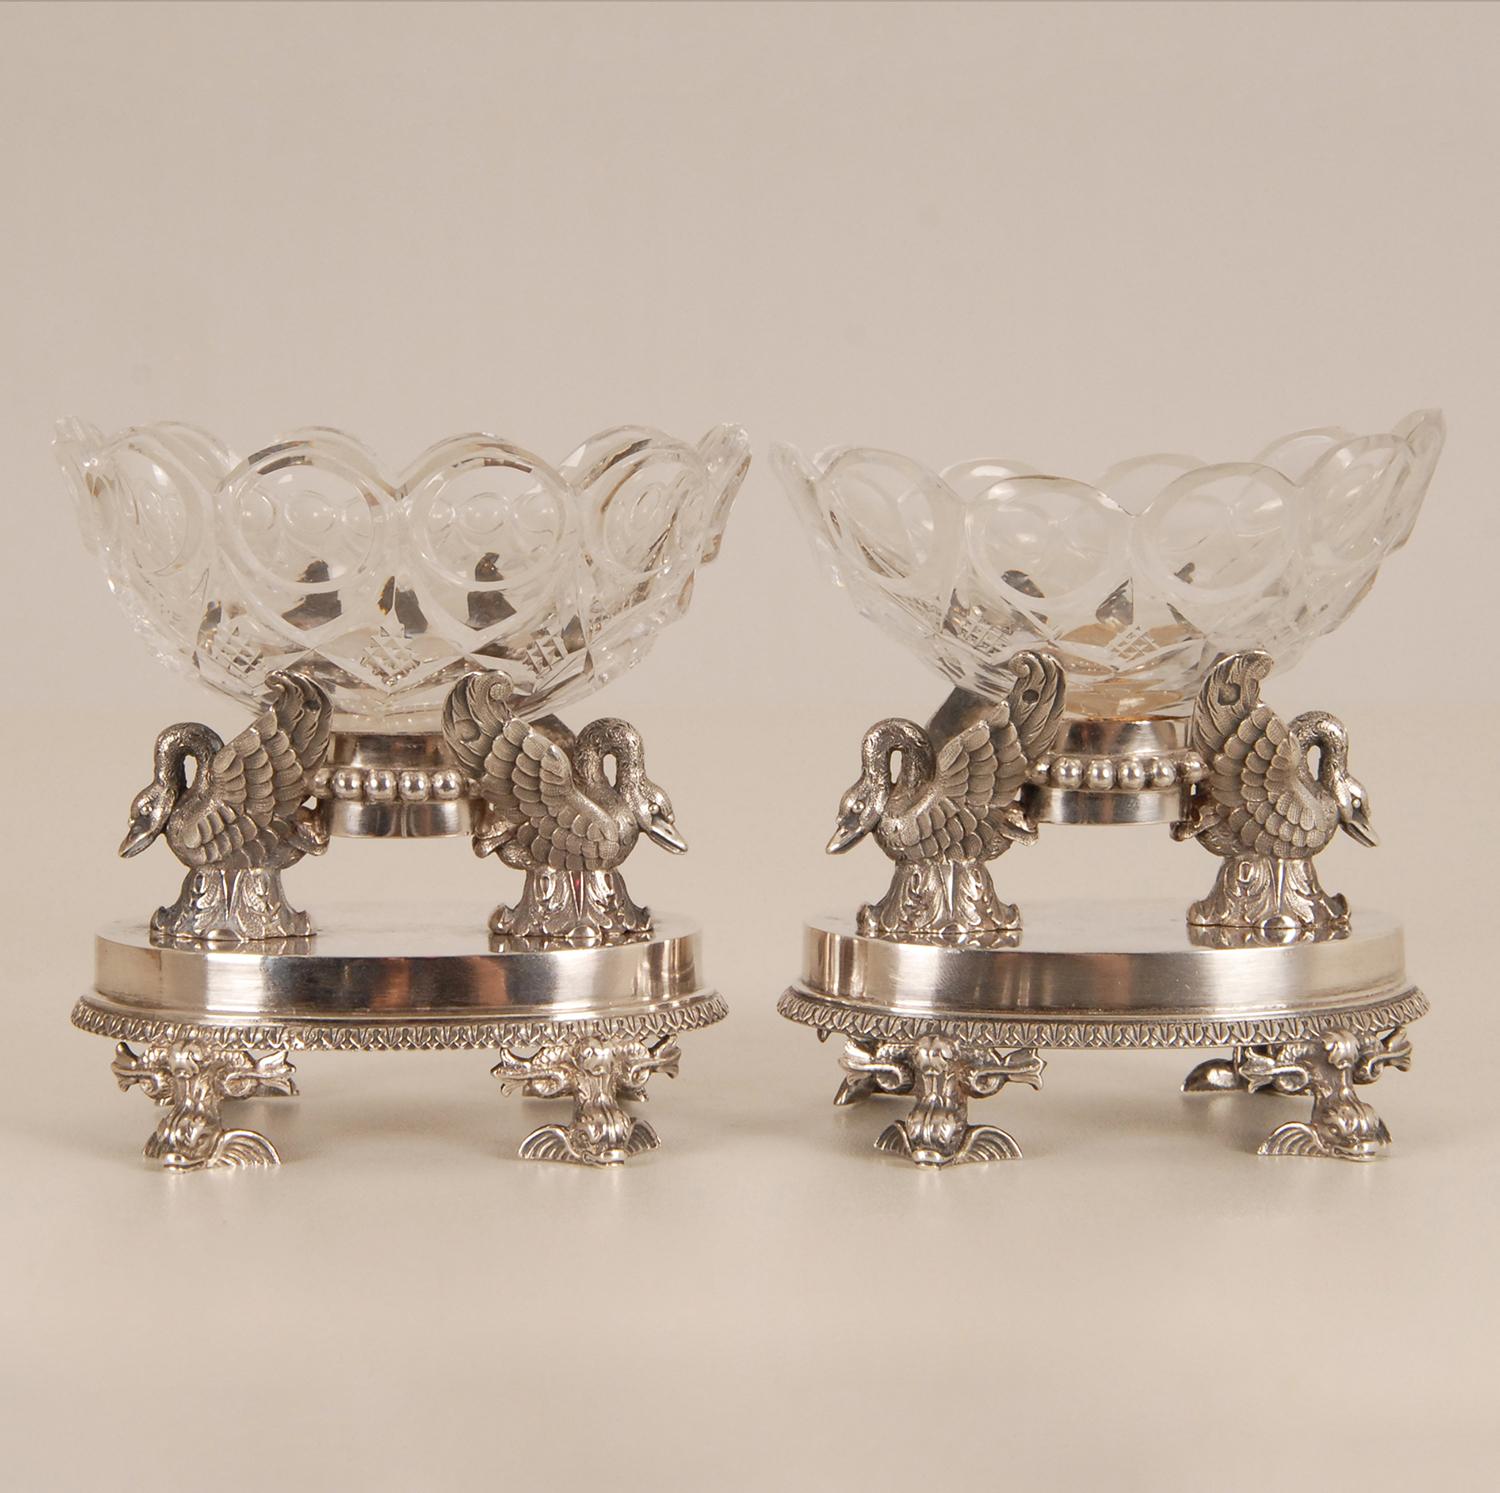 19th Century 18th Century Empire Silver Baccarat Crystal Salt Cellars  F. Durand Napoleonic  For Sale